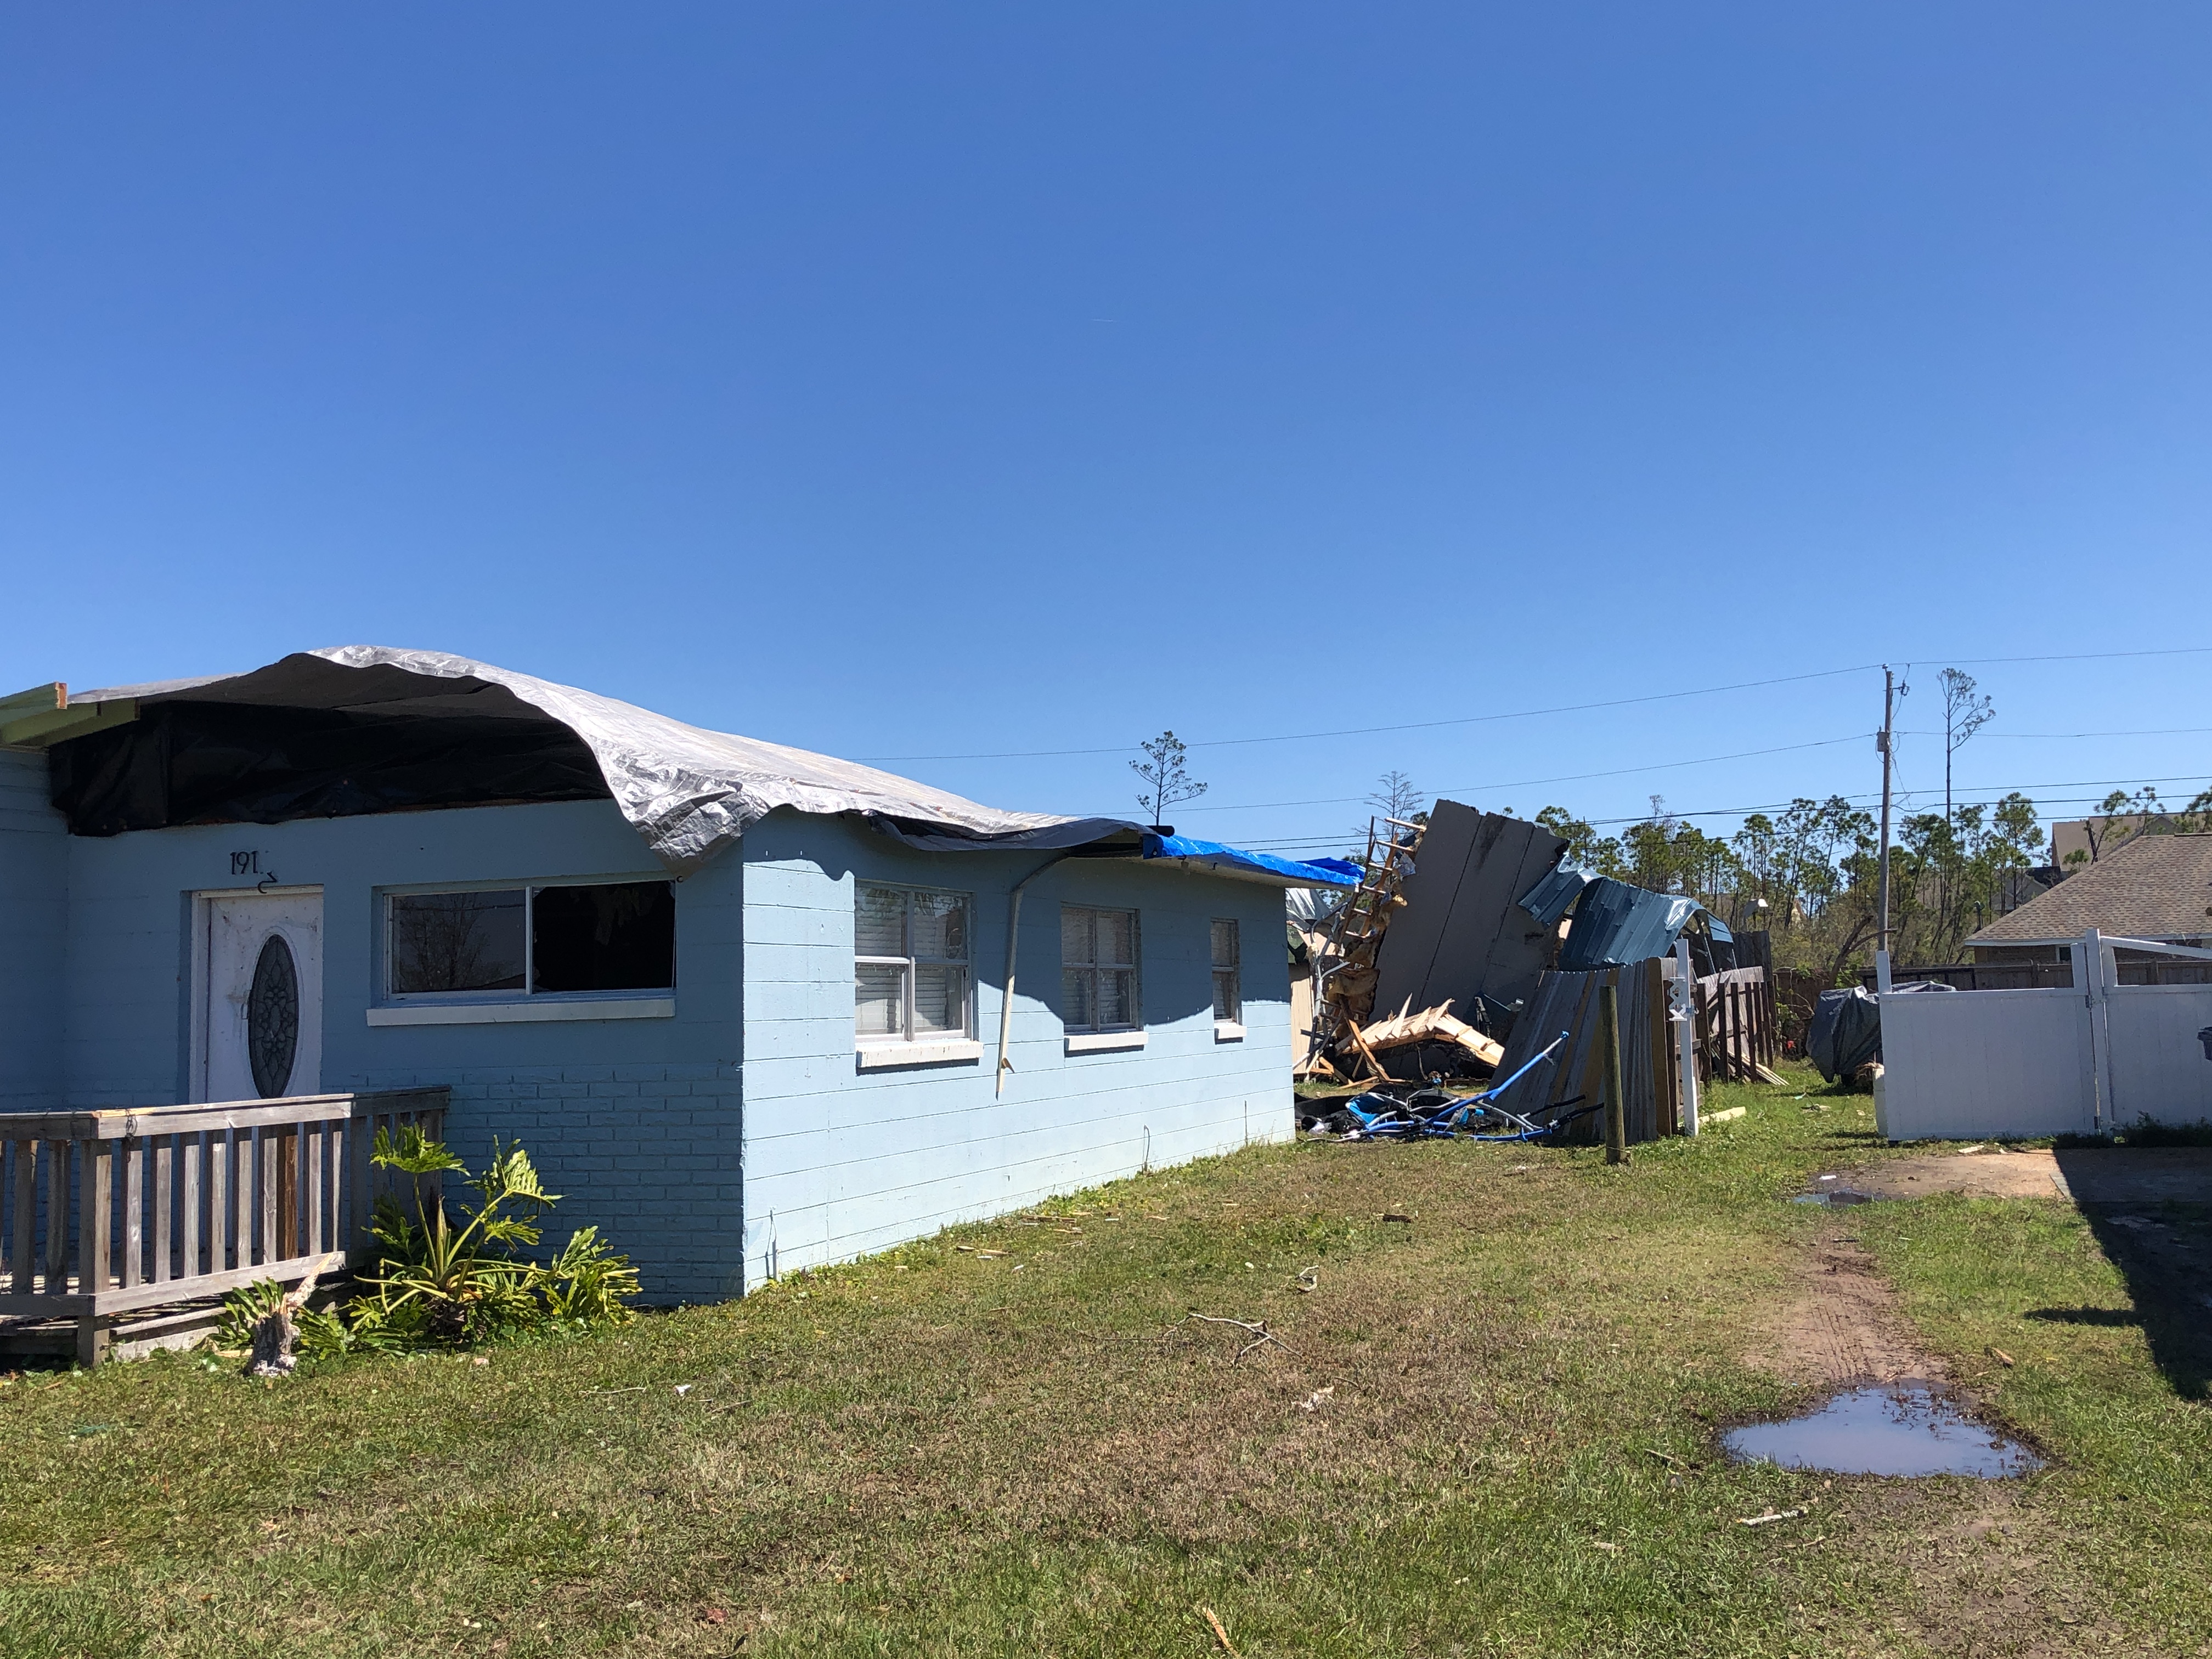 A home that had its roof torn off by an EF2 tornado in Panama City, Florida.